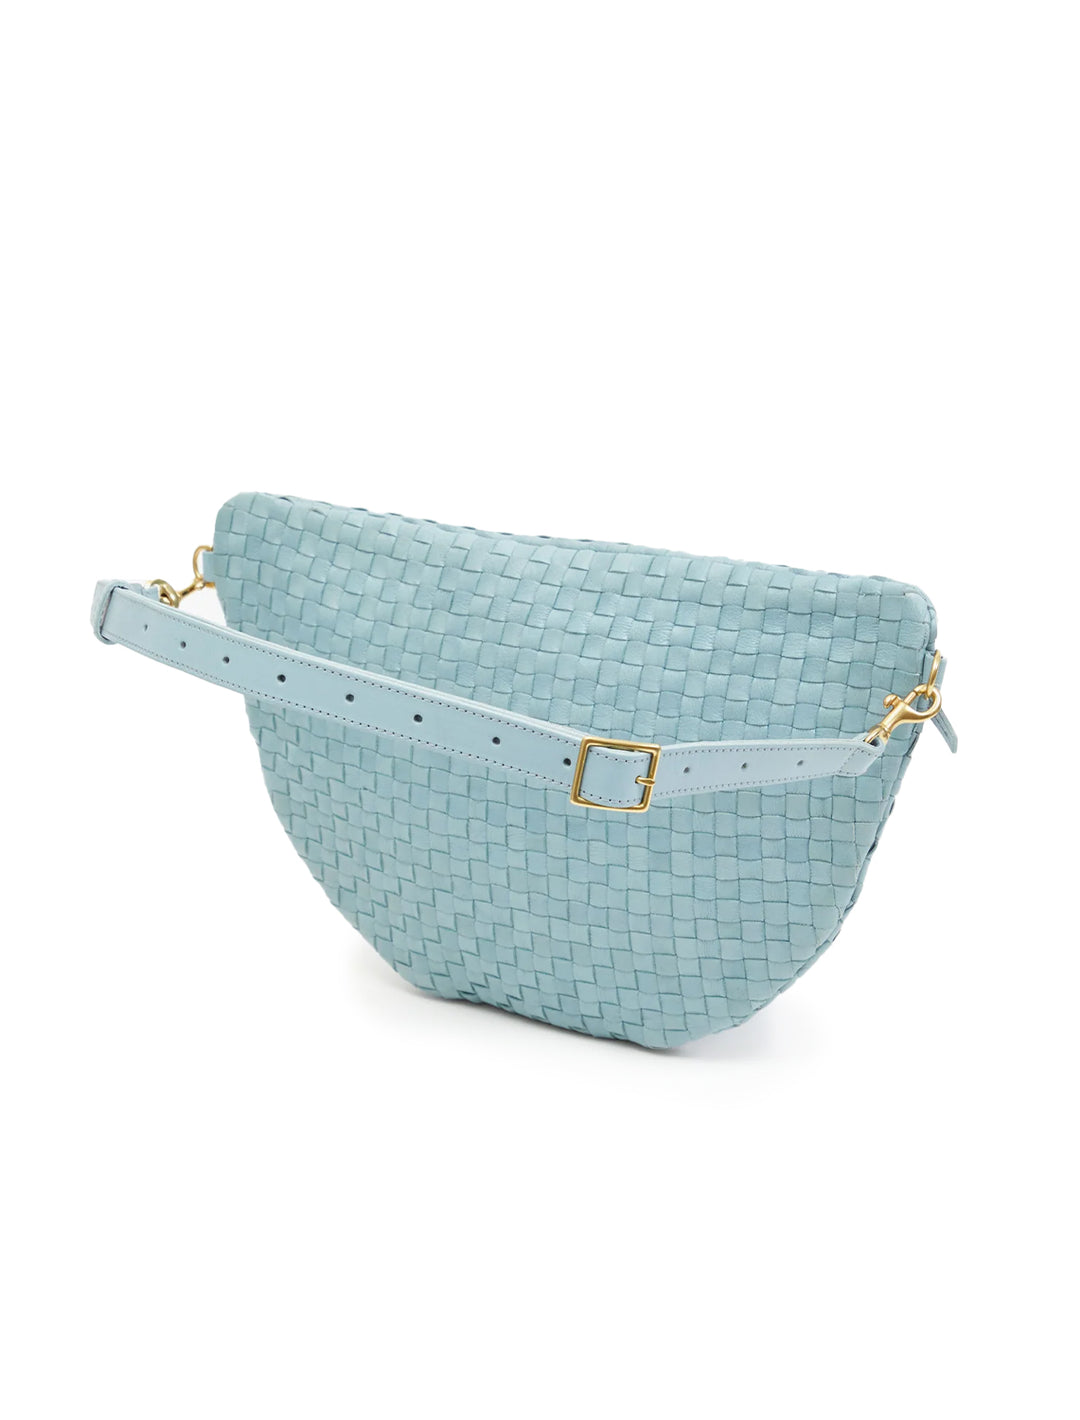 Back angle view of Clare V.'s grande fanny in sunbleached sky blue woven.